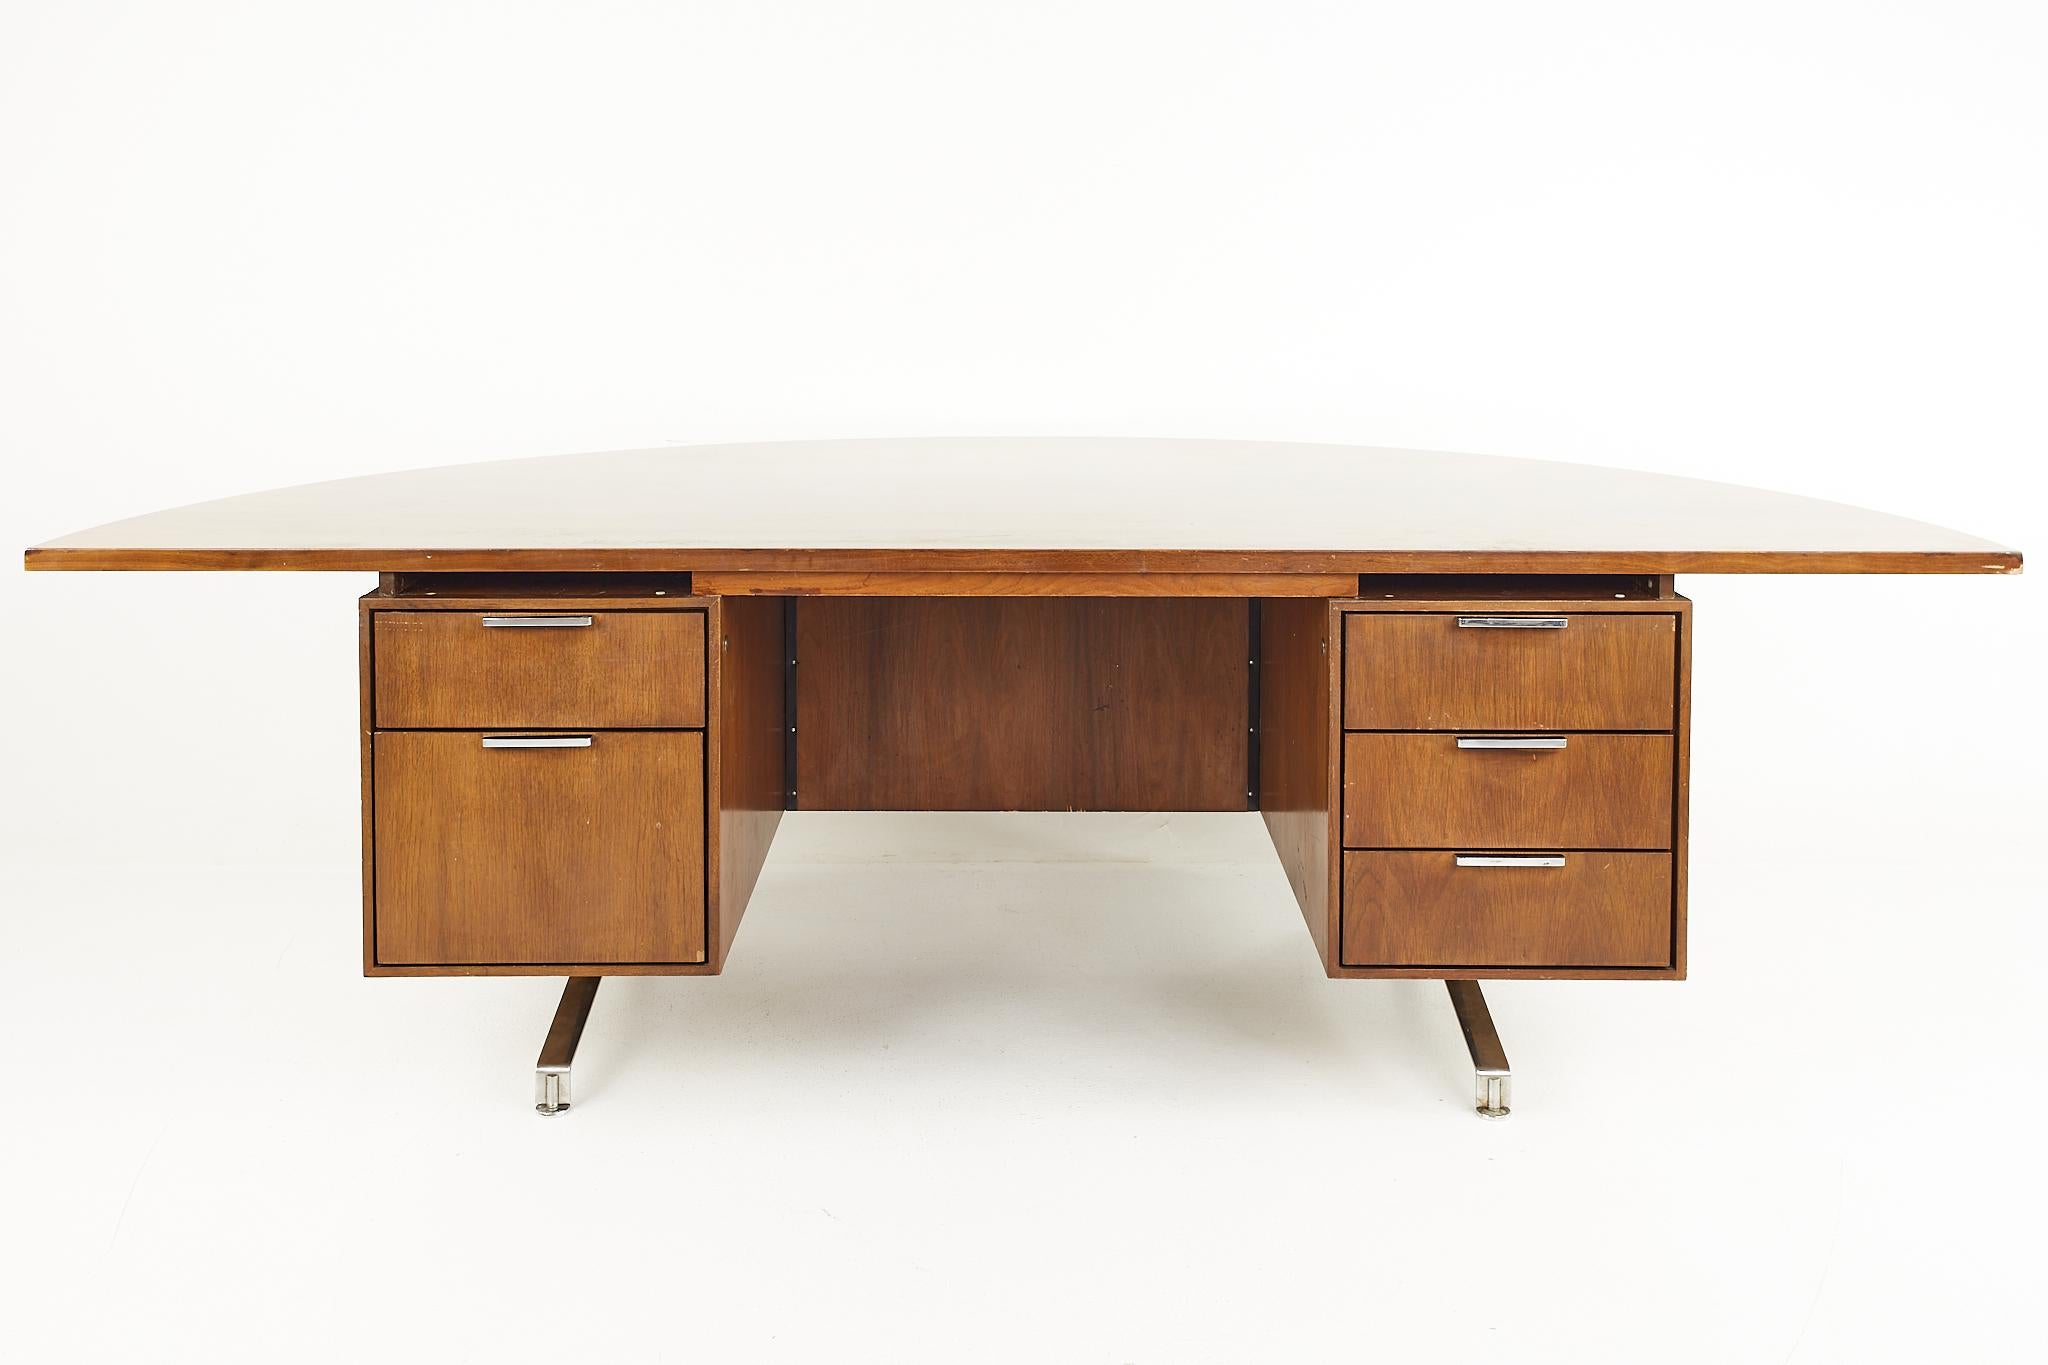 Jens Risom style mid century half round walnut executive desk

The desk measures: 95.5 wide x 47.75 deep x 29 inches high

All pieces of furniture can be had in what we call restored vintage condition. That means the piece is restored upon